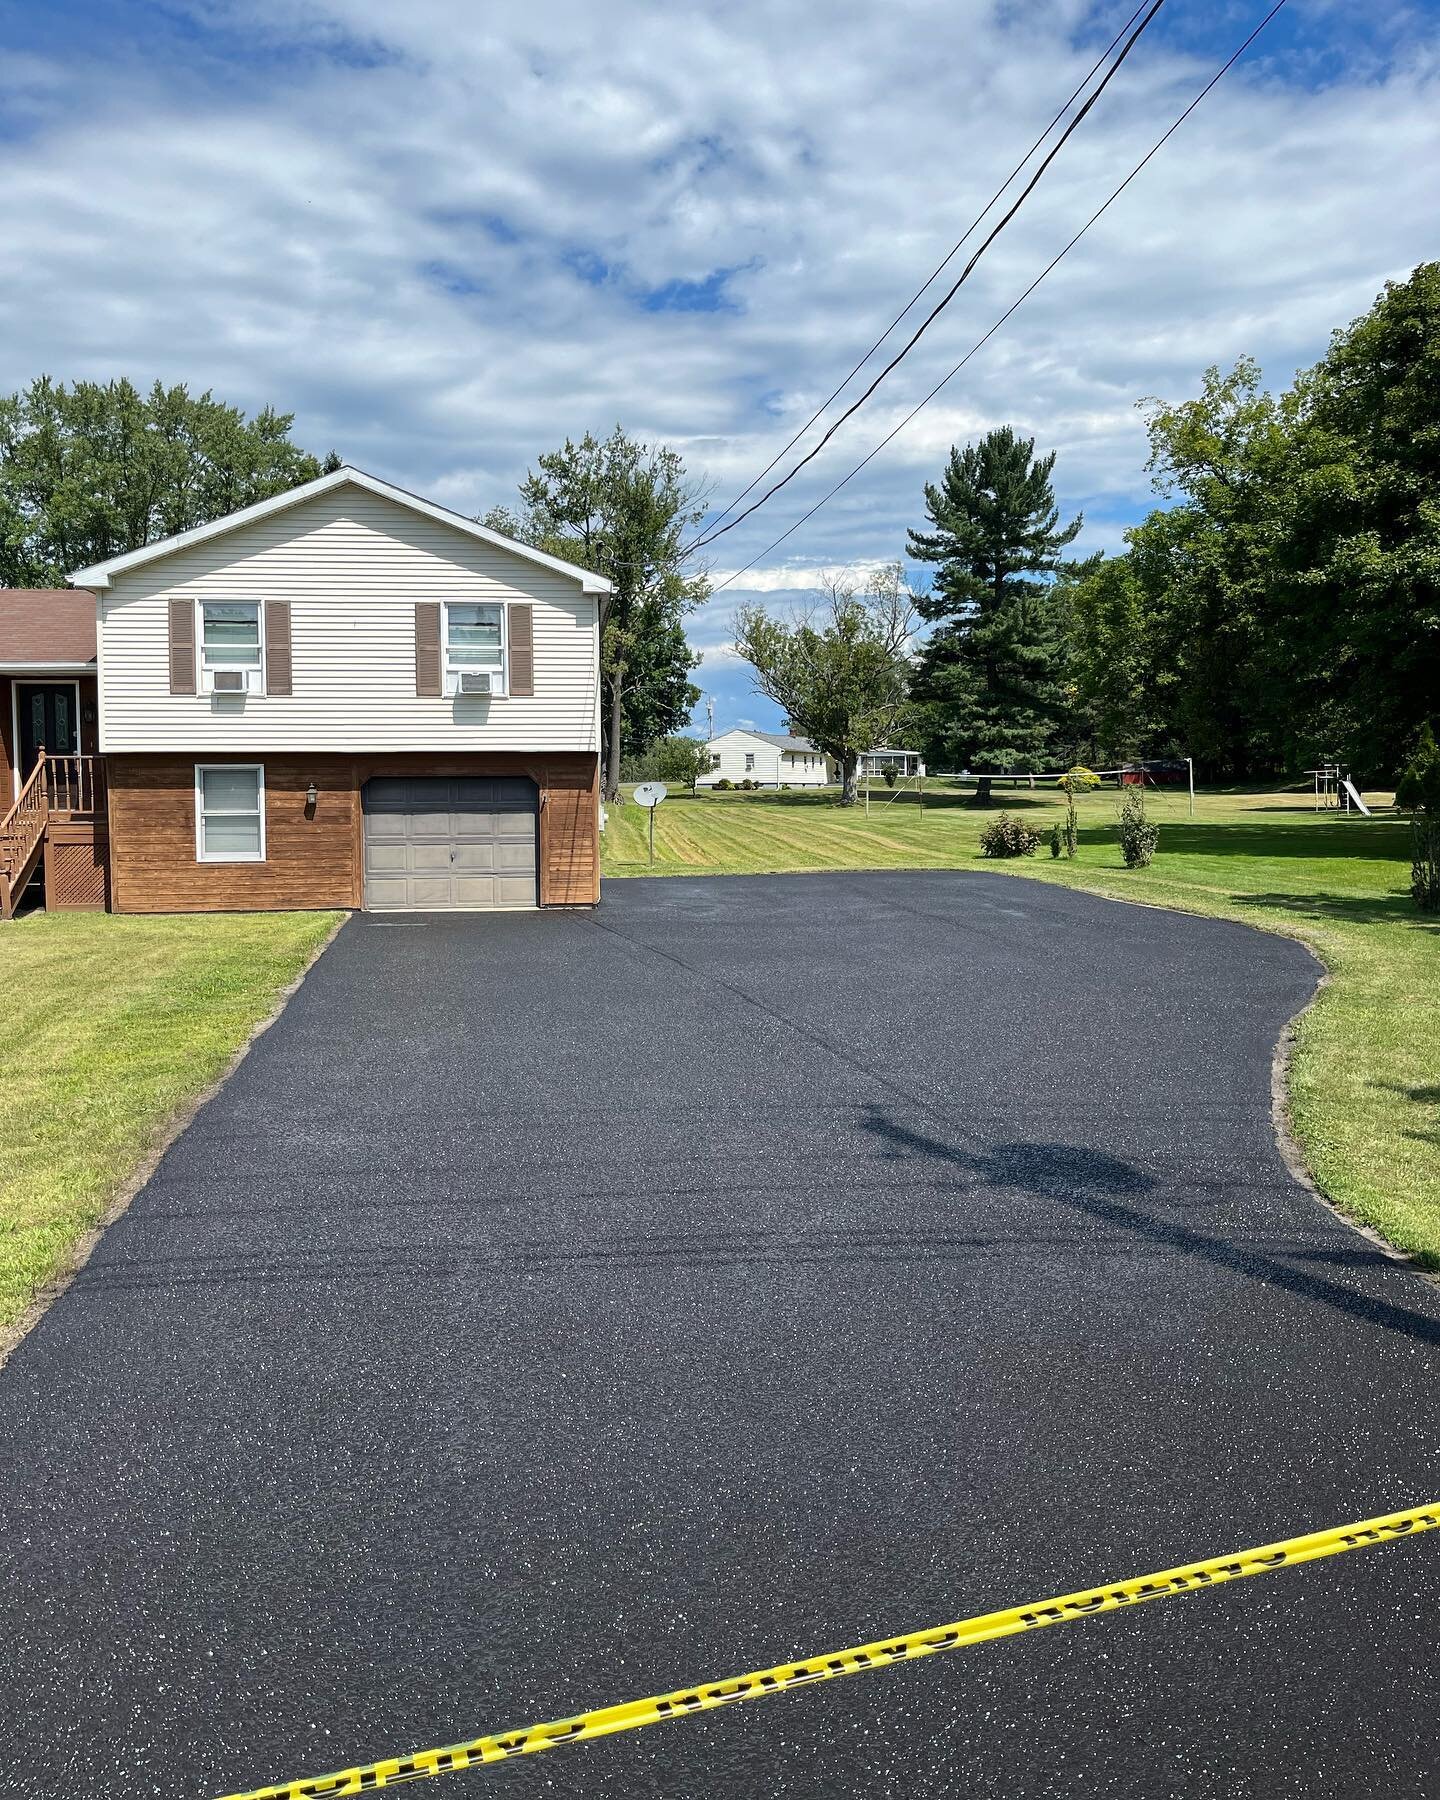 Transformation Tuesday - Call us today ‼️

📱 (315) 748-0425
🖥 www.3brotherssealcoating.com (link in bio)
.
.
.
.
#driveway #sealcoating #sealing #drivewaysealcoating #smallbusiness #smallbusinessowner #linestriping #crackfilling #tiktok #commerical